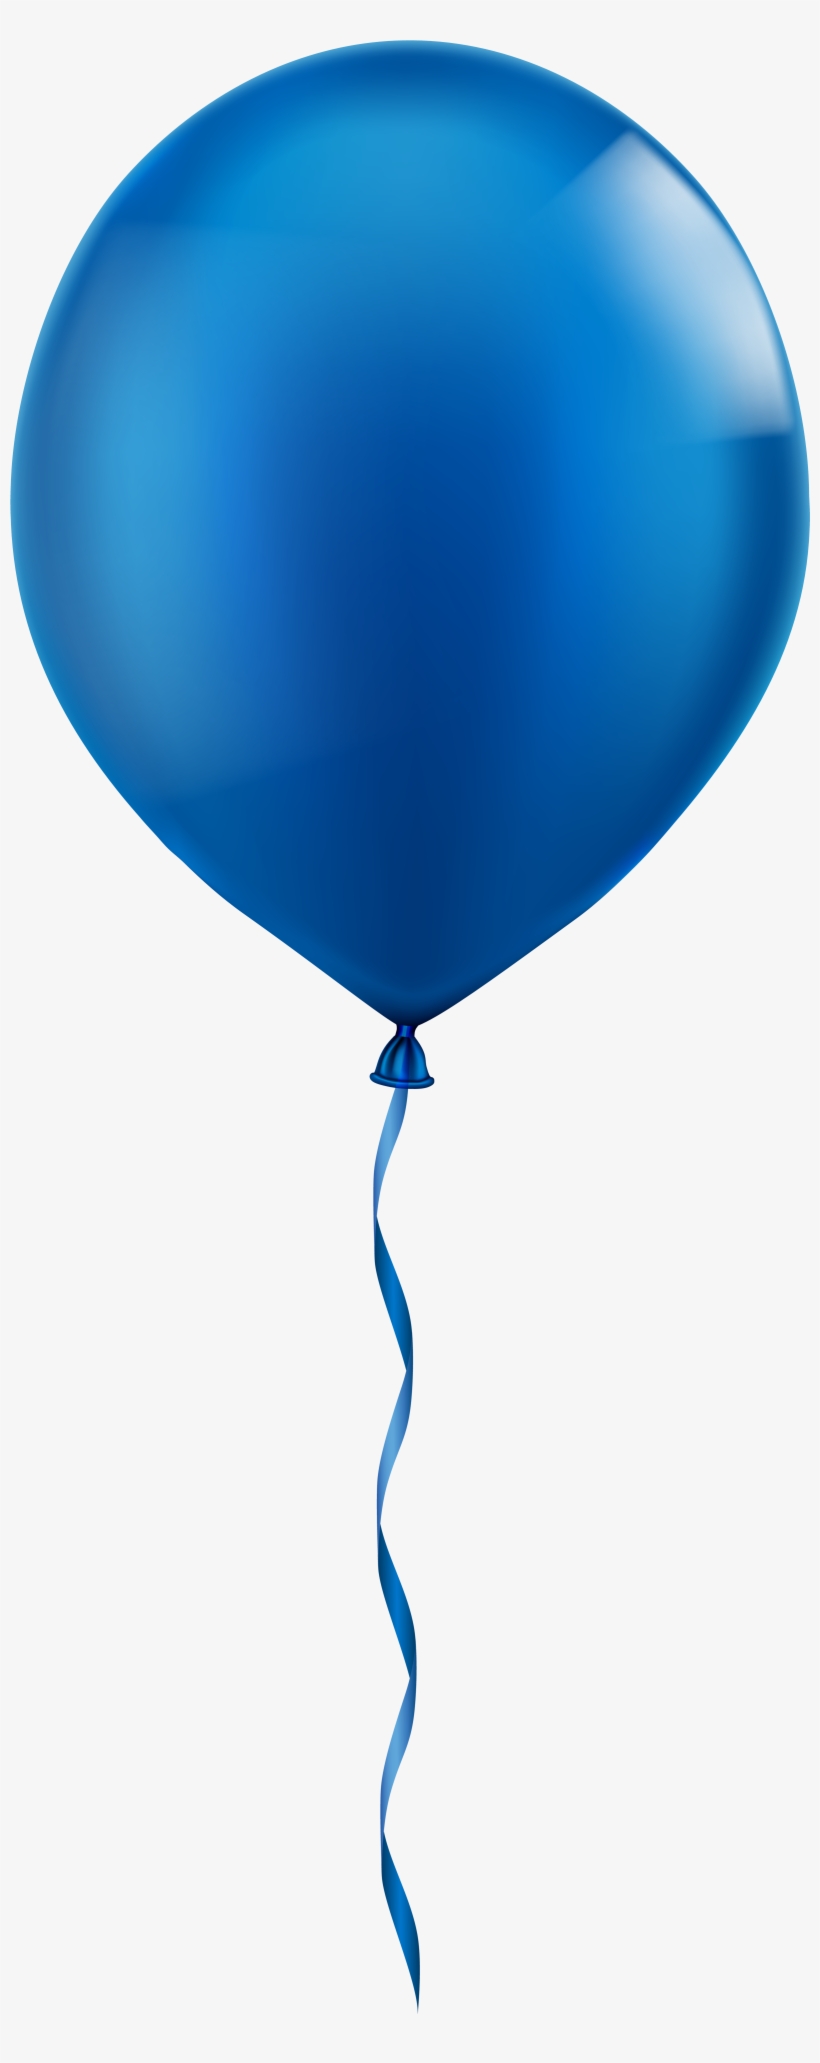 Blue Balloon Png, transparent png #22351